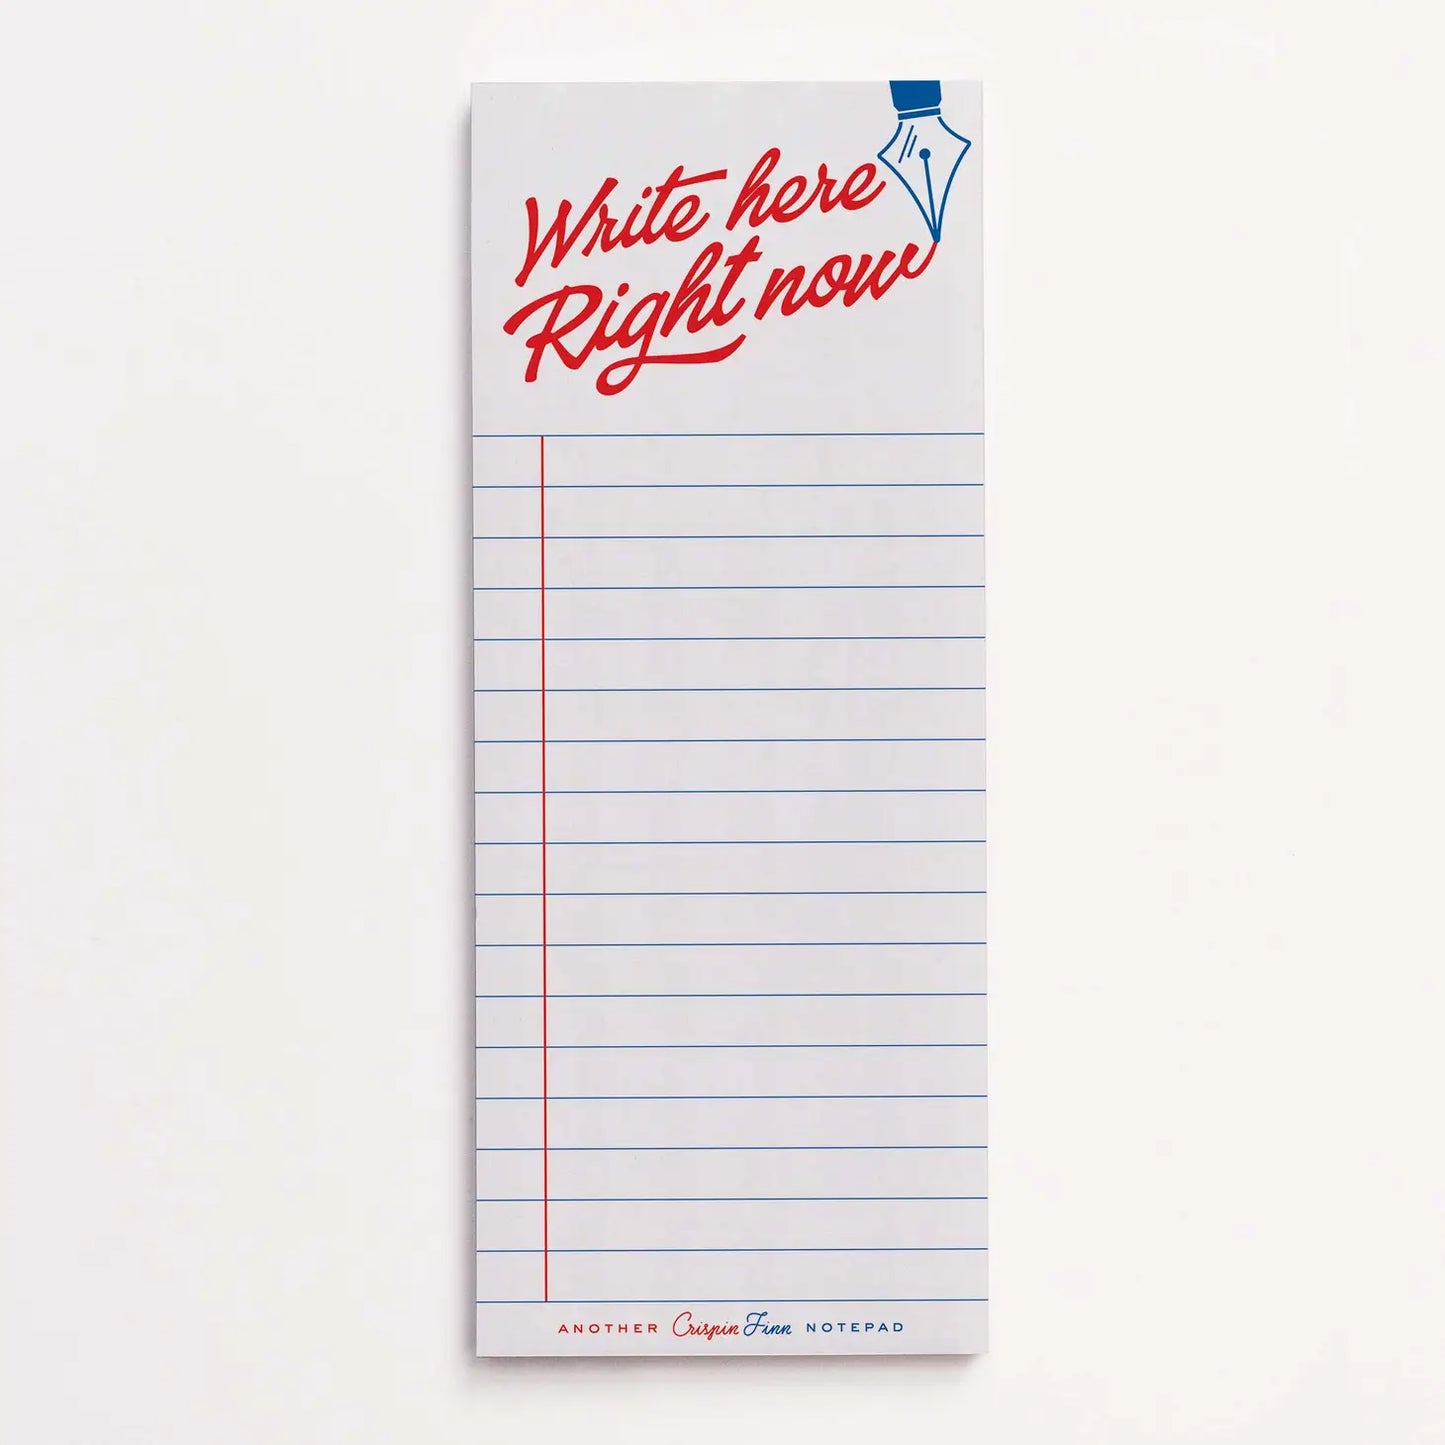 Write Here Right Now Notepad by Crispin Finn